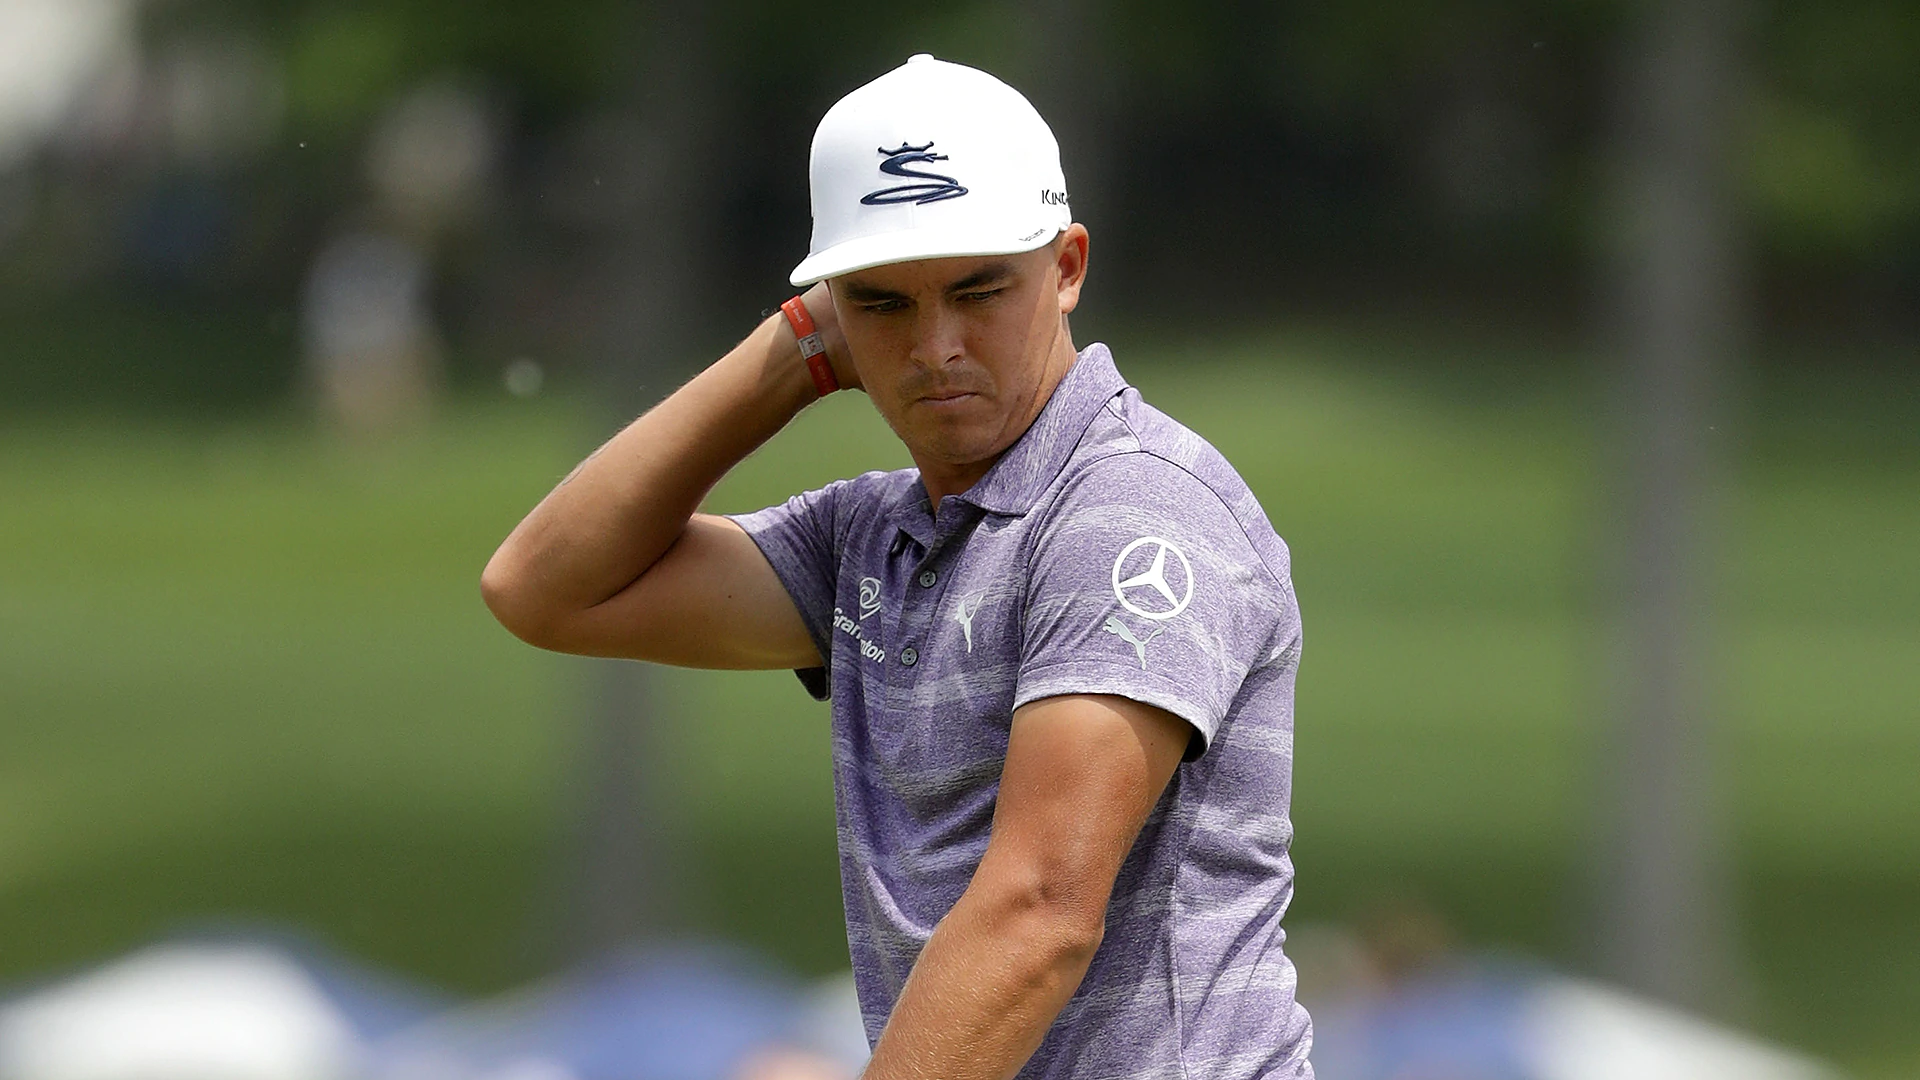 Watch: Fowler four-putts from 19 feet